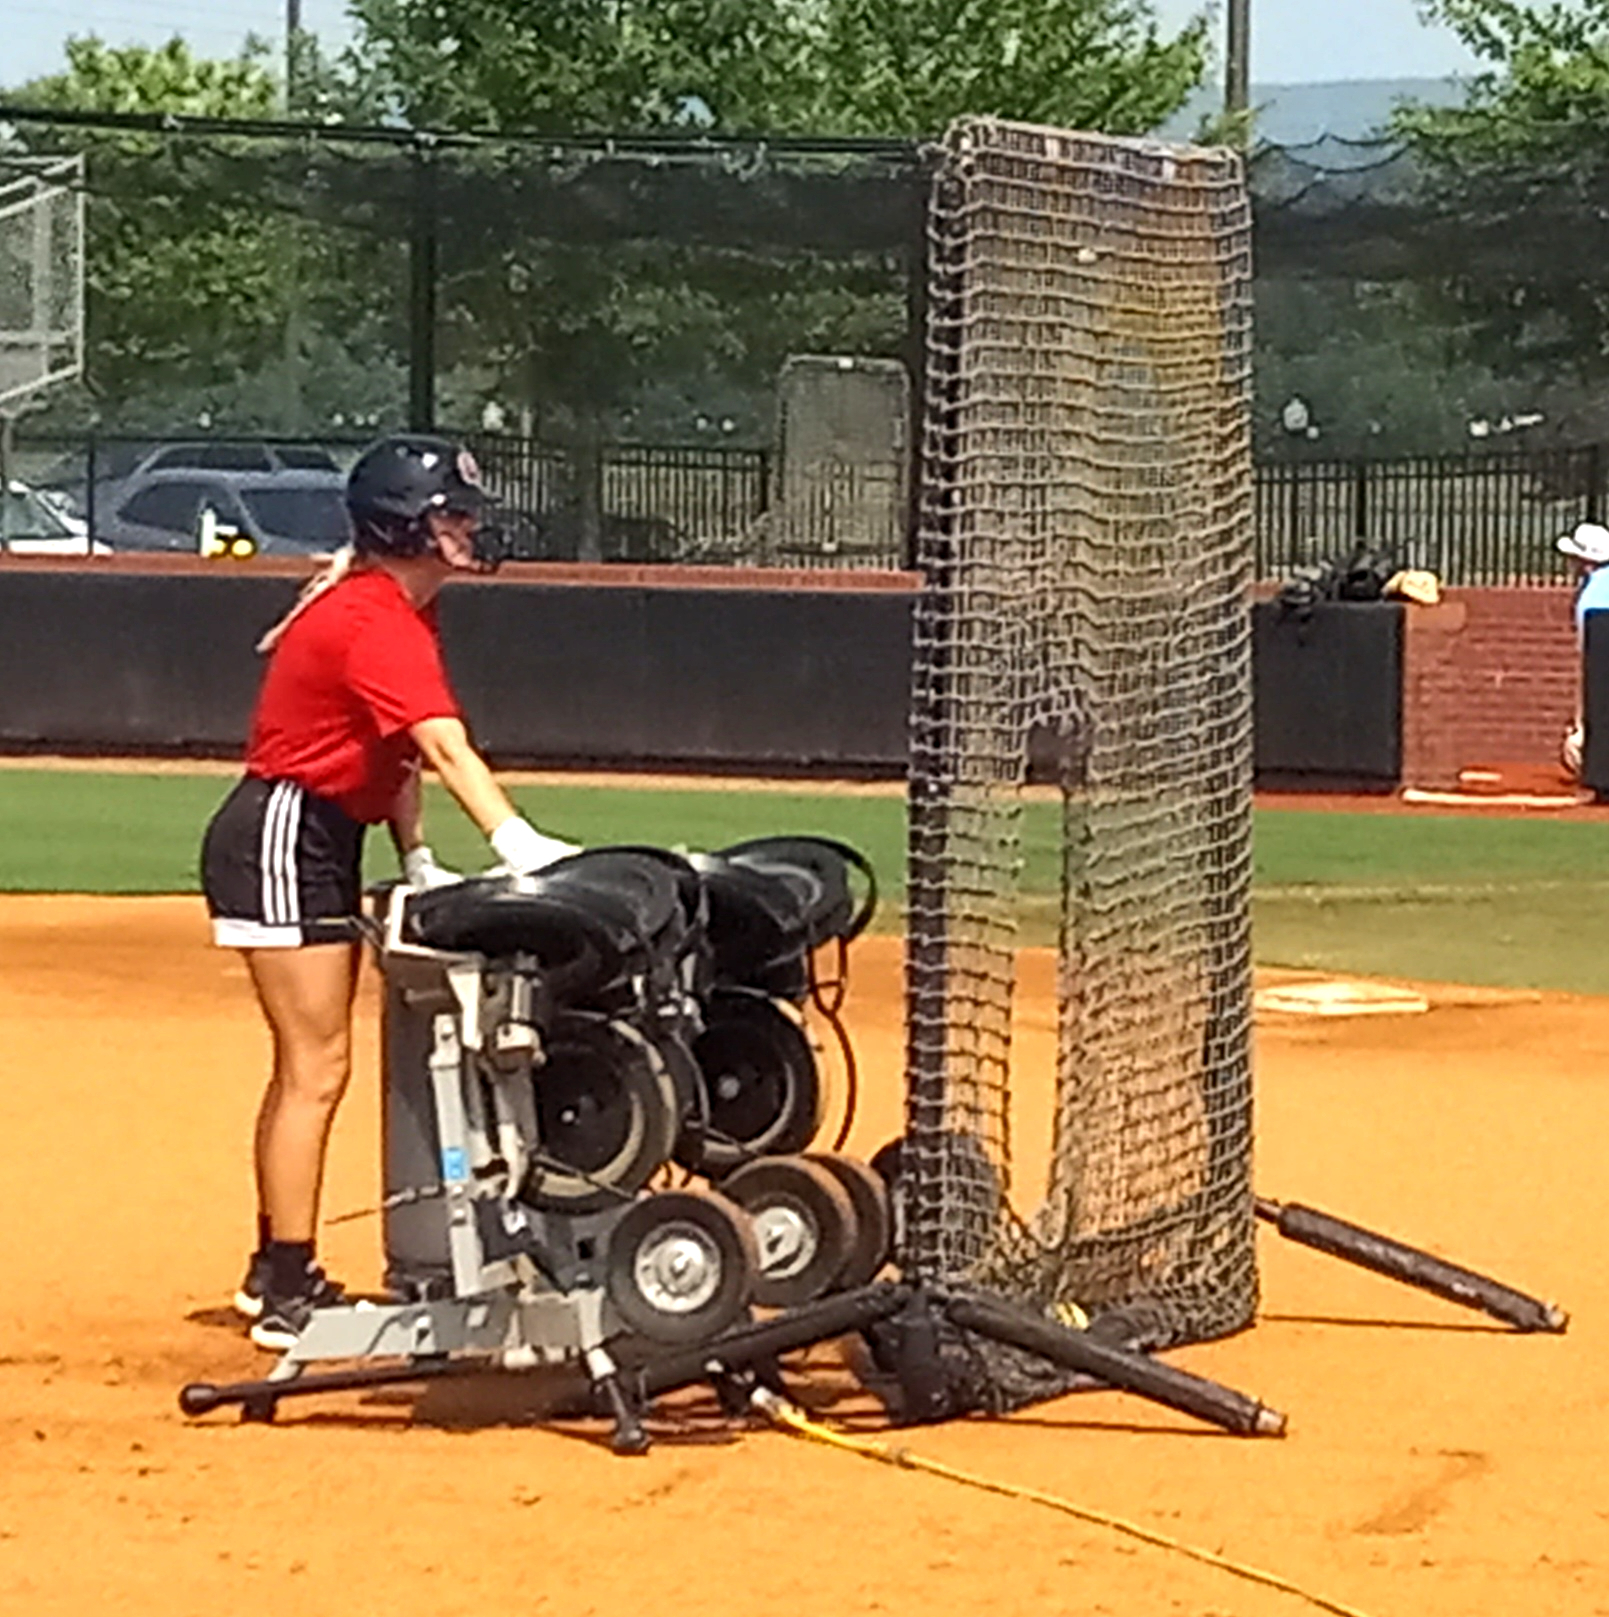 Former Alexandria High School and current Jacksonville State University player Ashley Phillips operates the pitching machine during Wednesday’s Smash It Sports Vipers practice at Choccolocco Park. (Photo by Joe Medley)